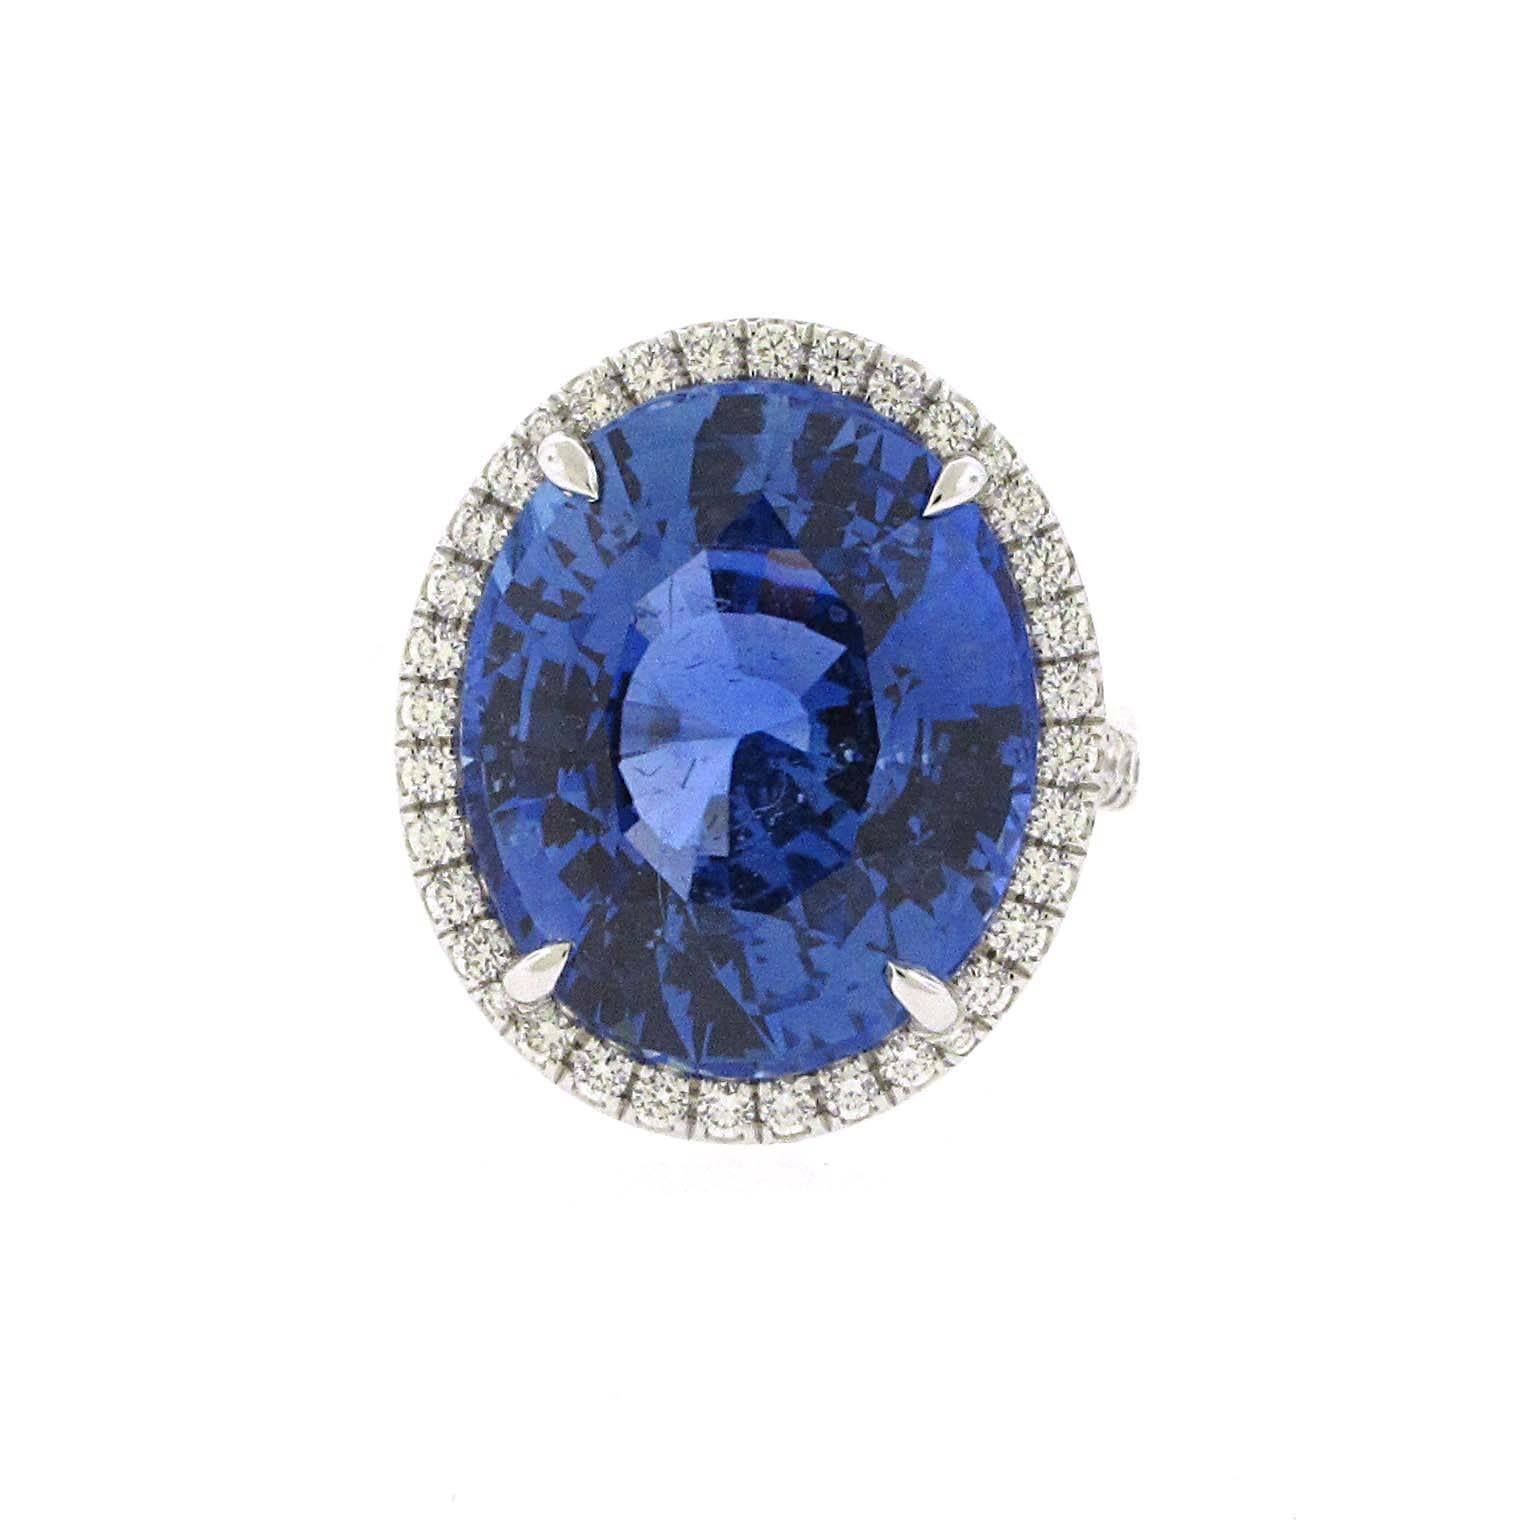 This is the ring of all rings. Nearly 20 carat Ceylon / Sri Lanka sapphire. This sapphire is the true blue color that you would want in a ring. It is a gorgeous oval accented with a fine diamond pave halo. Almost 1 carat of fine white diamonds. The